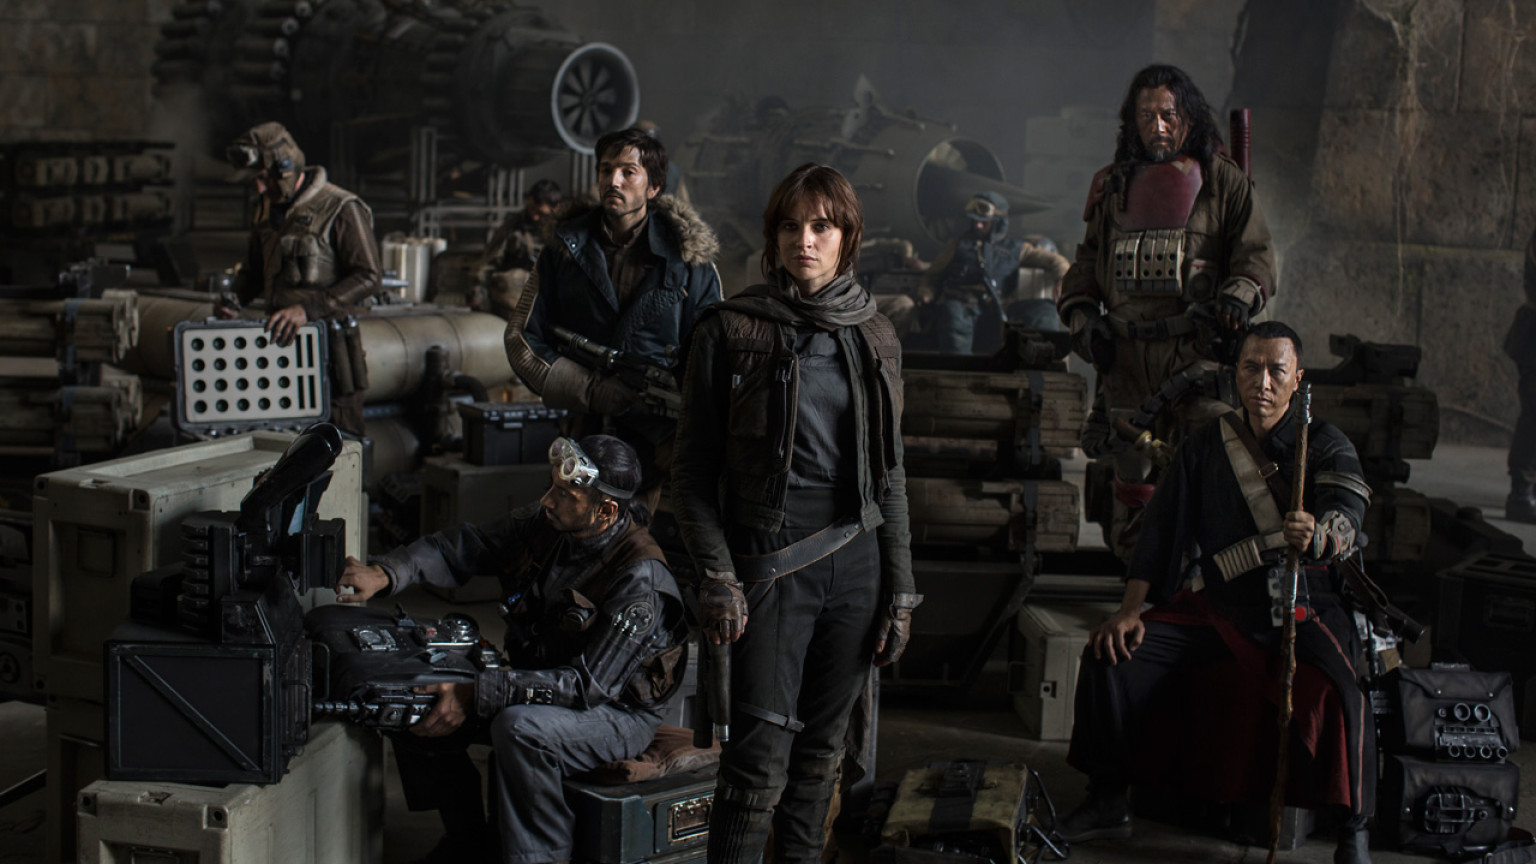 star wars - Star Wars Rogue One : nouvelle bande-annonce ROGUE ONE